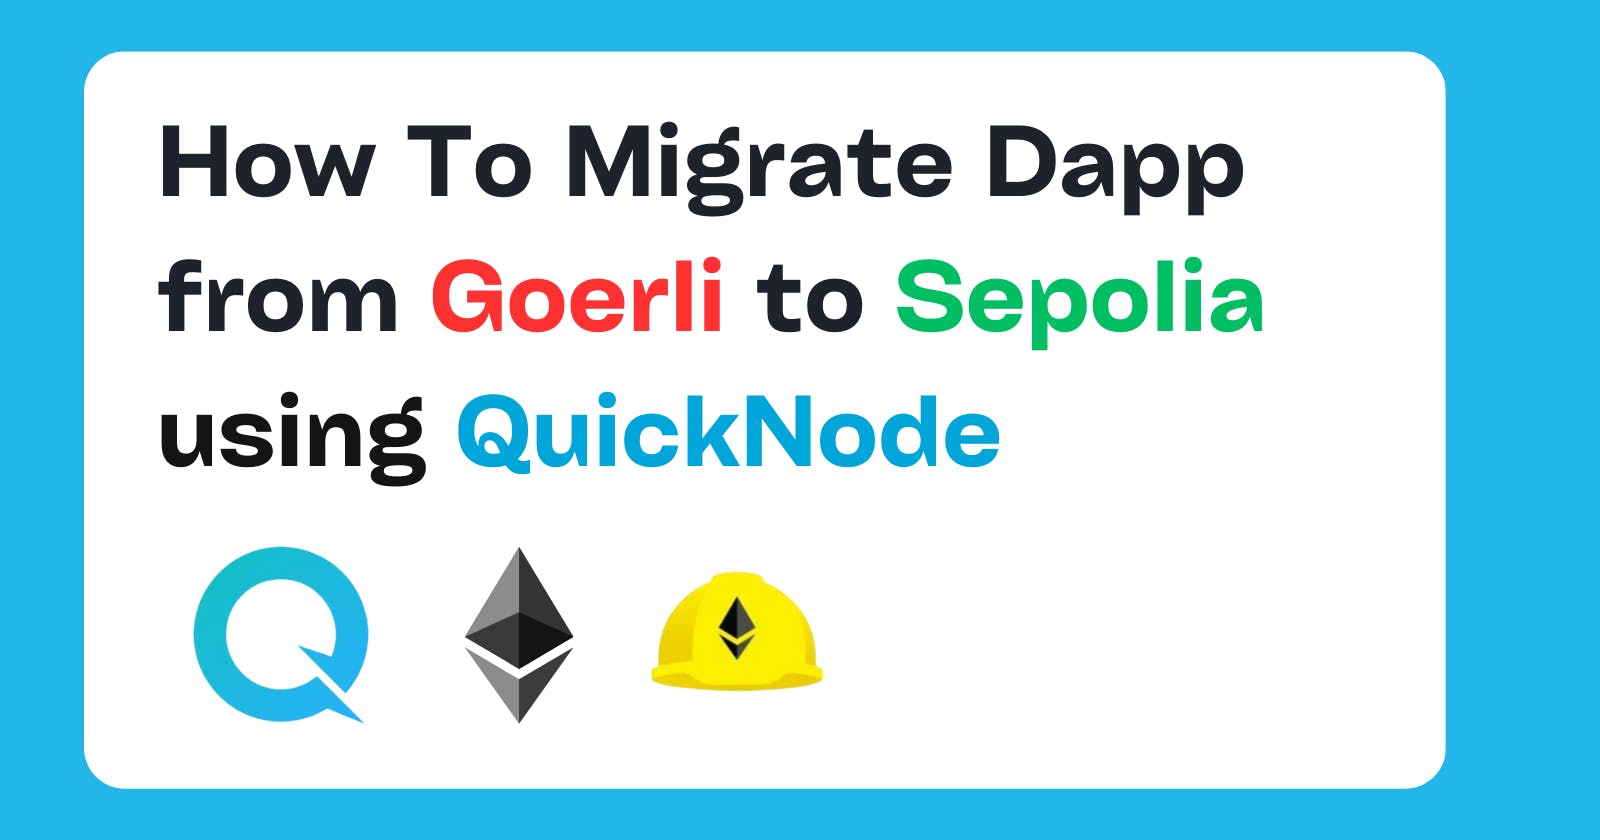 How To Migrate Dapp from Goerli to Sepolia using QuickNode